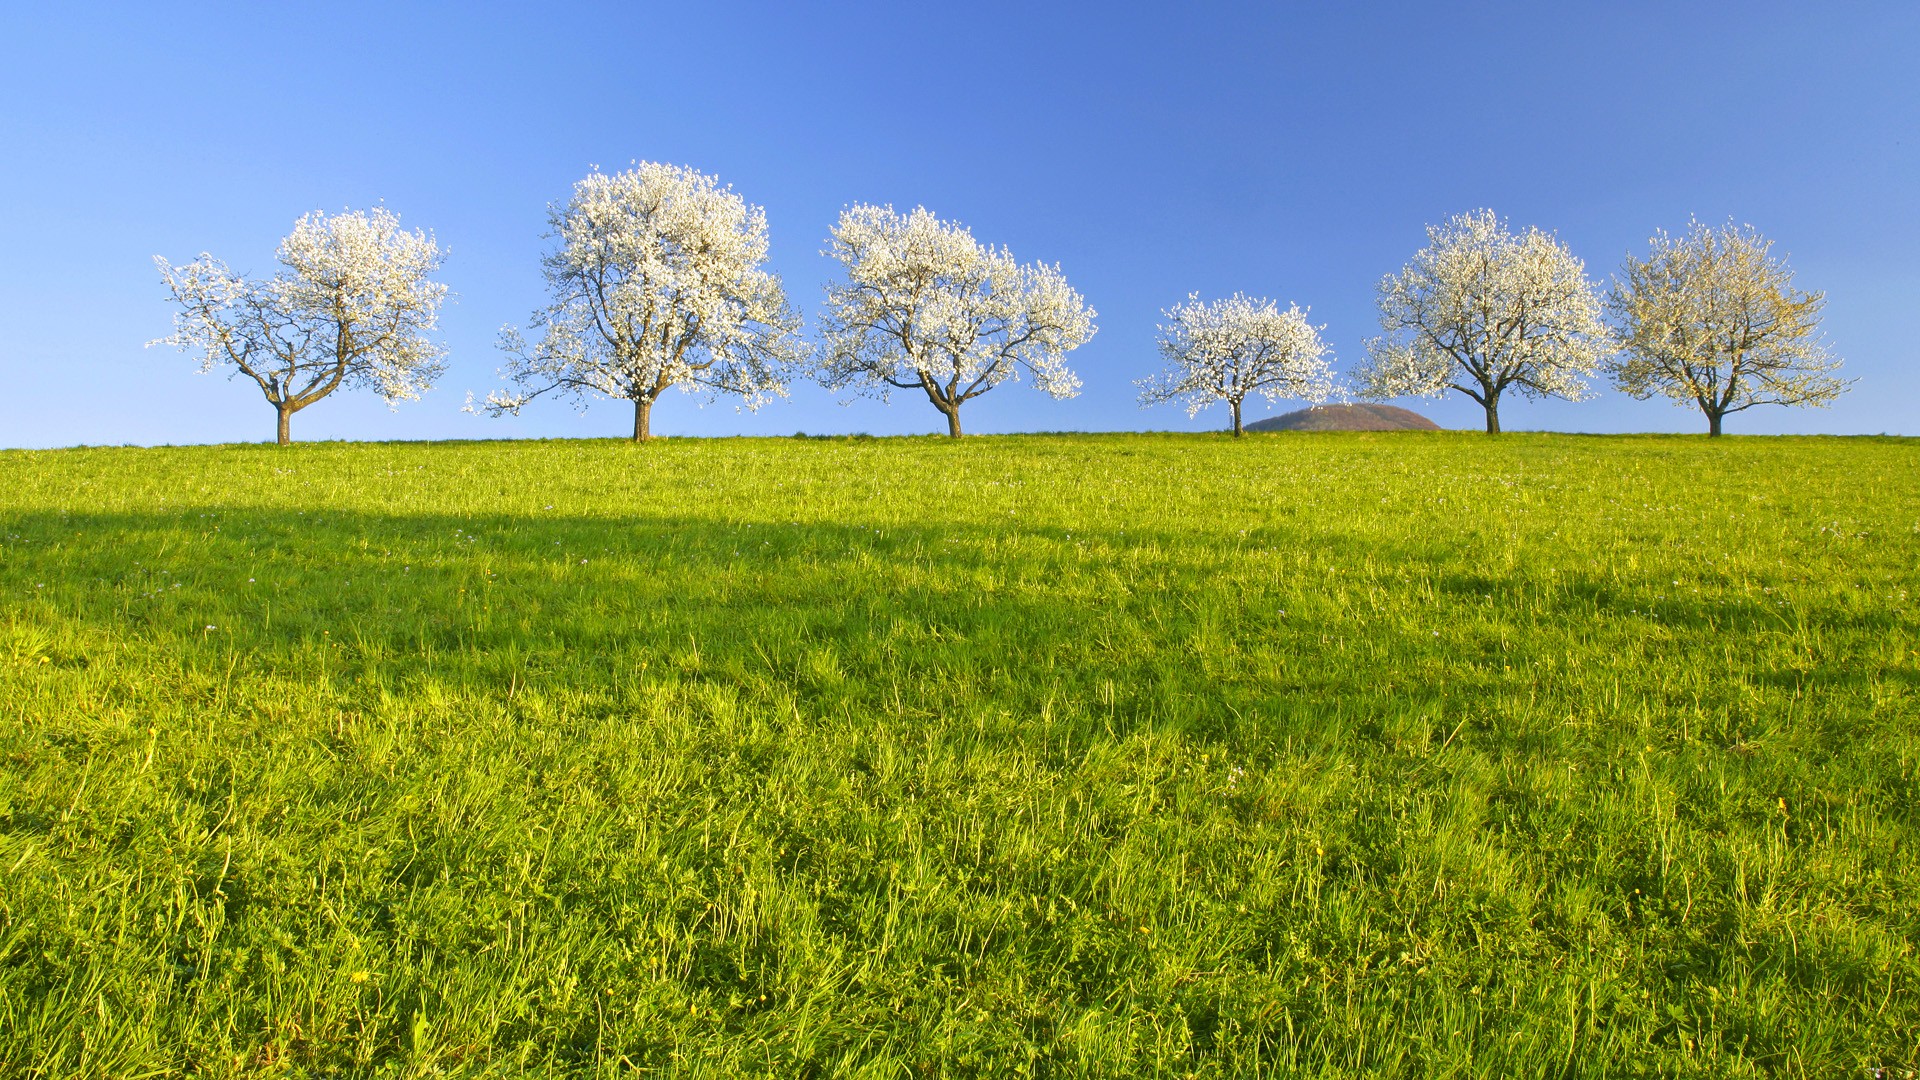 General 1920x1080 nature landscape trees spring grass field